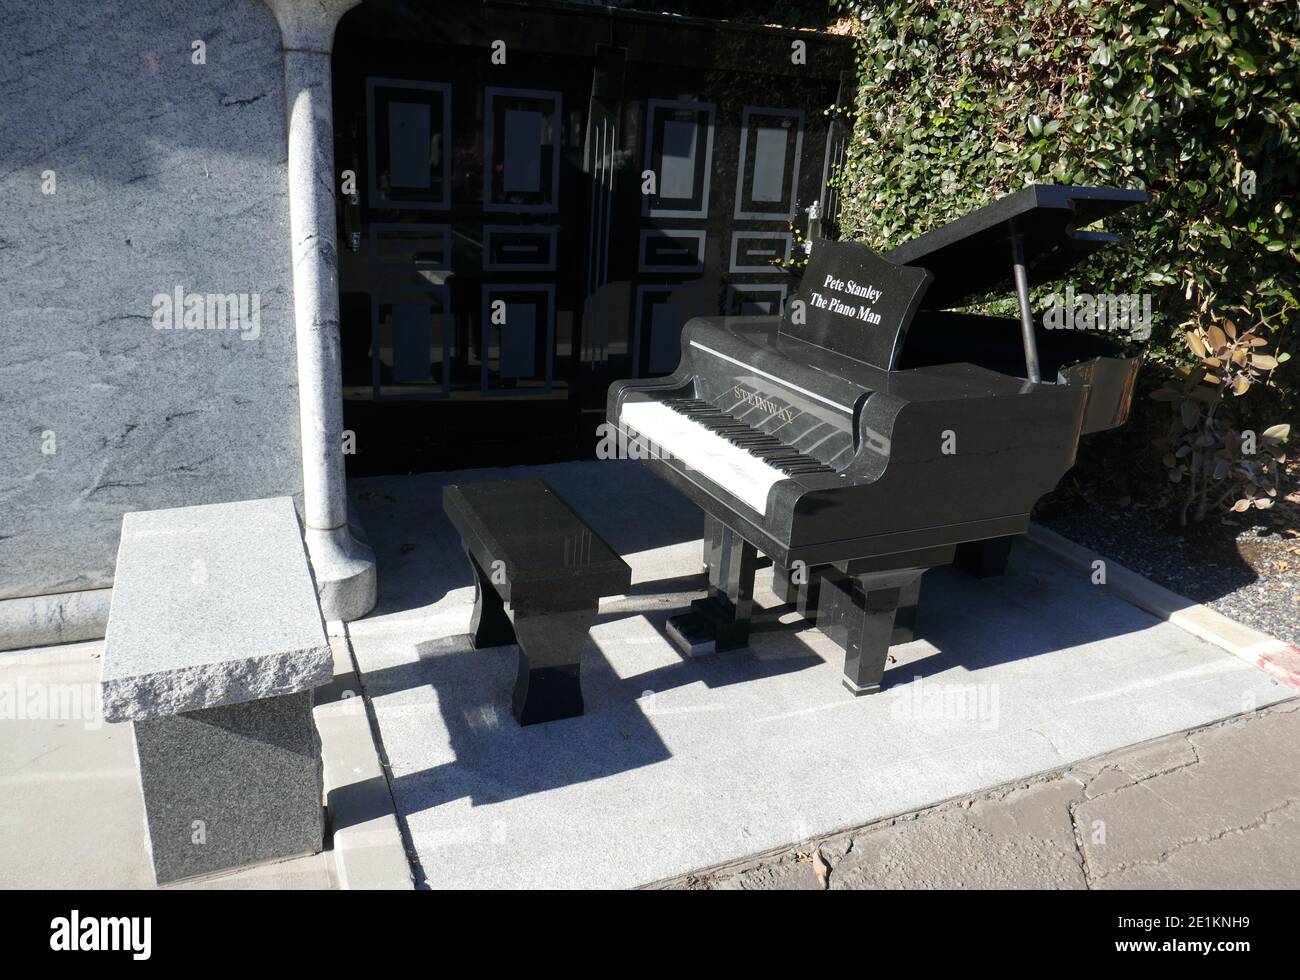 Los Angeles, California, USA 31st December 2020 A general view of  atmosphere of Pete Stanley, The Piano Man's Grave at Hollywood Forever  Cemetery on December 31, 2020 in Los Angeles, California, USA.